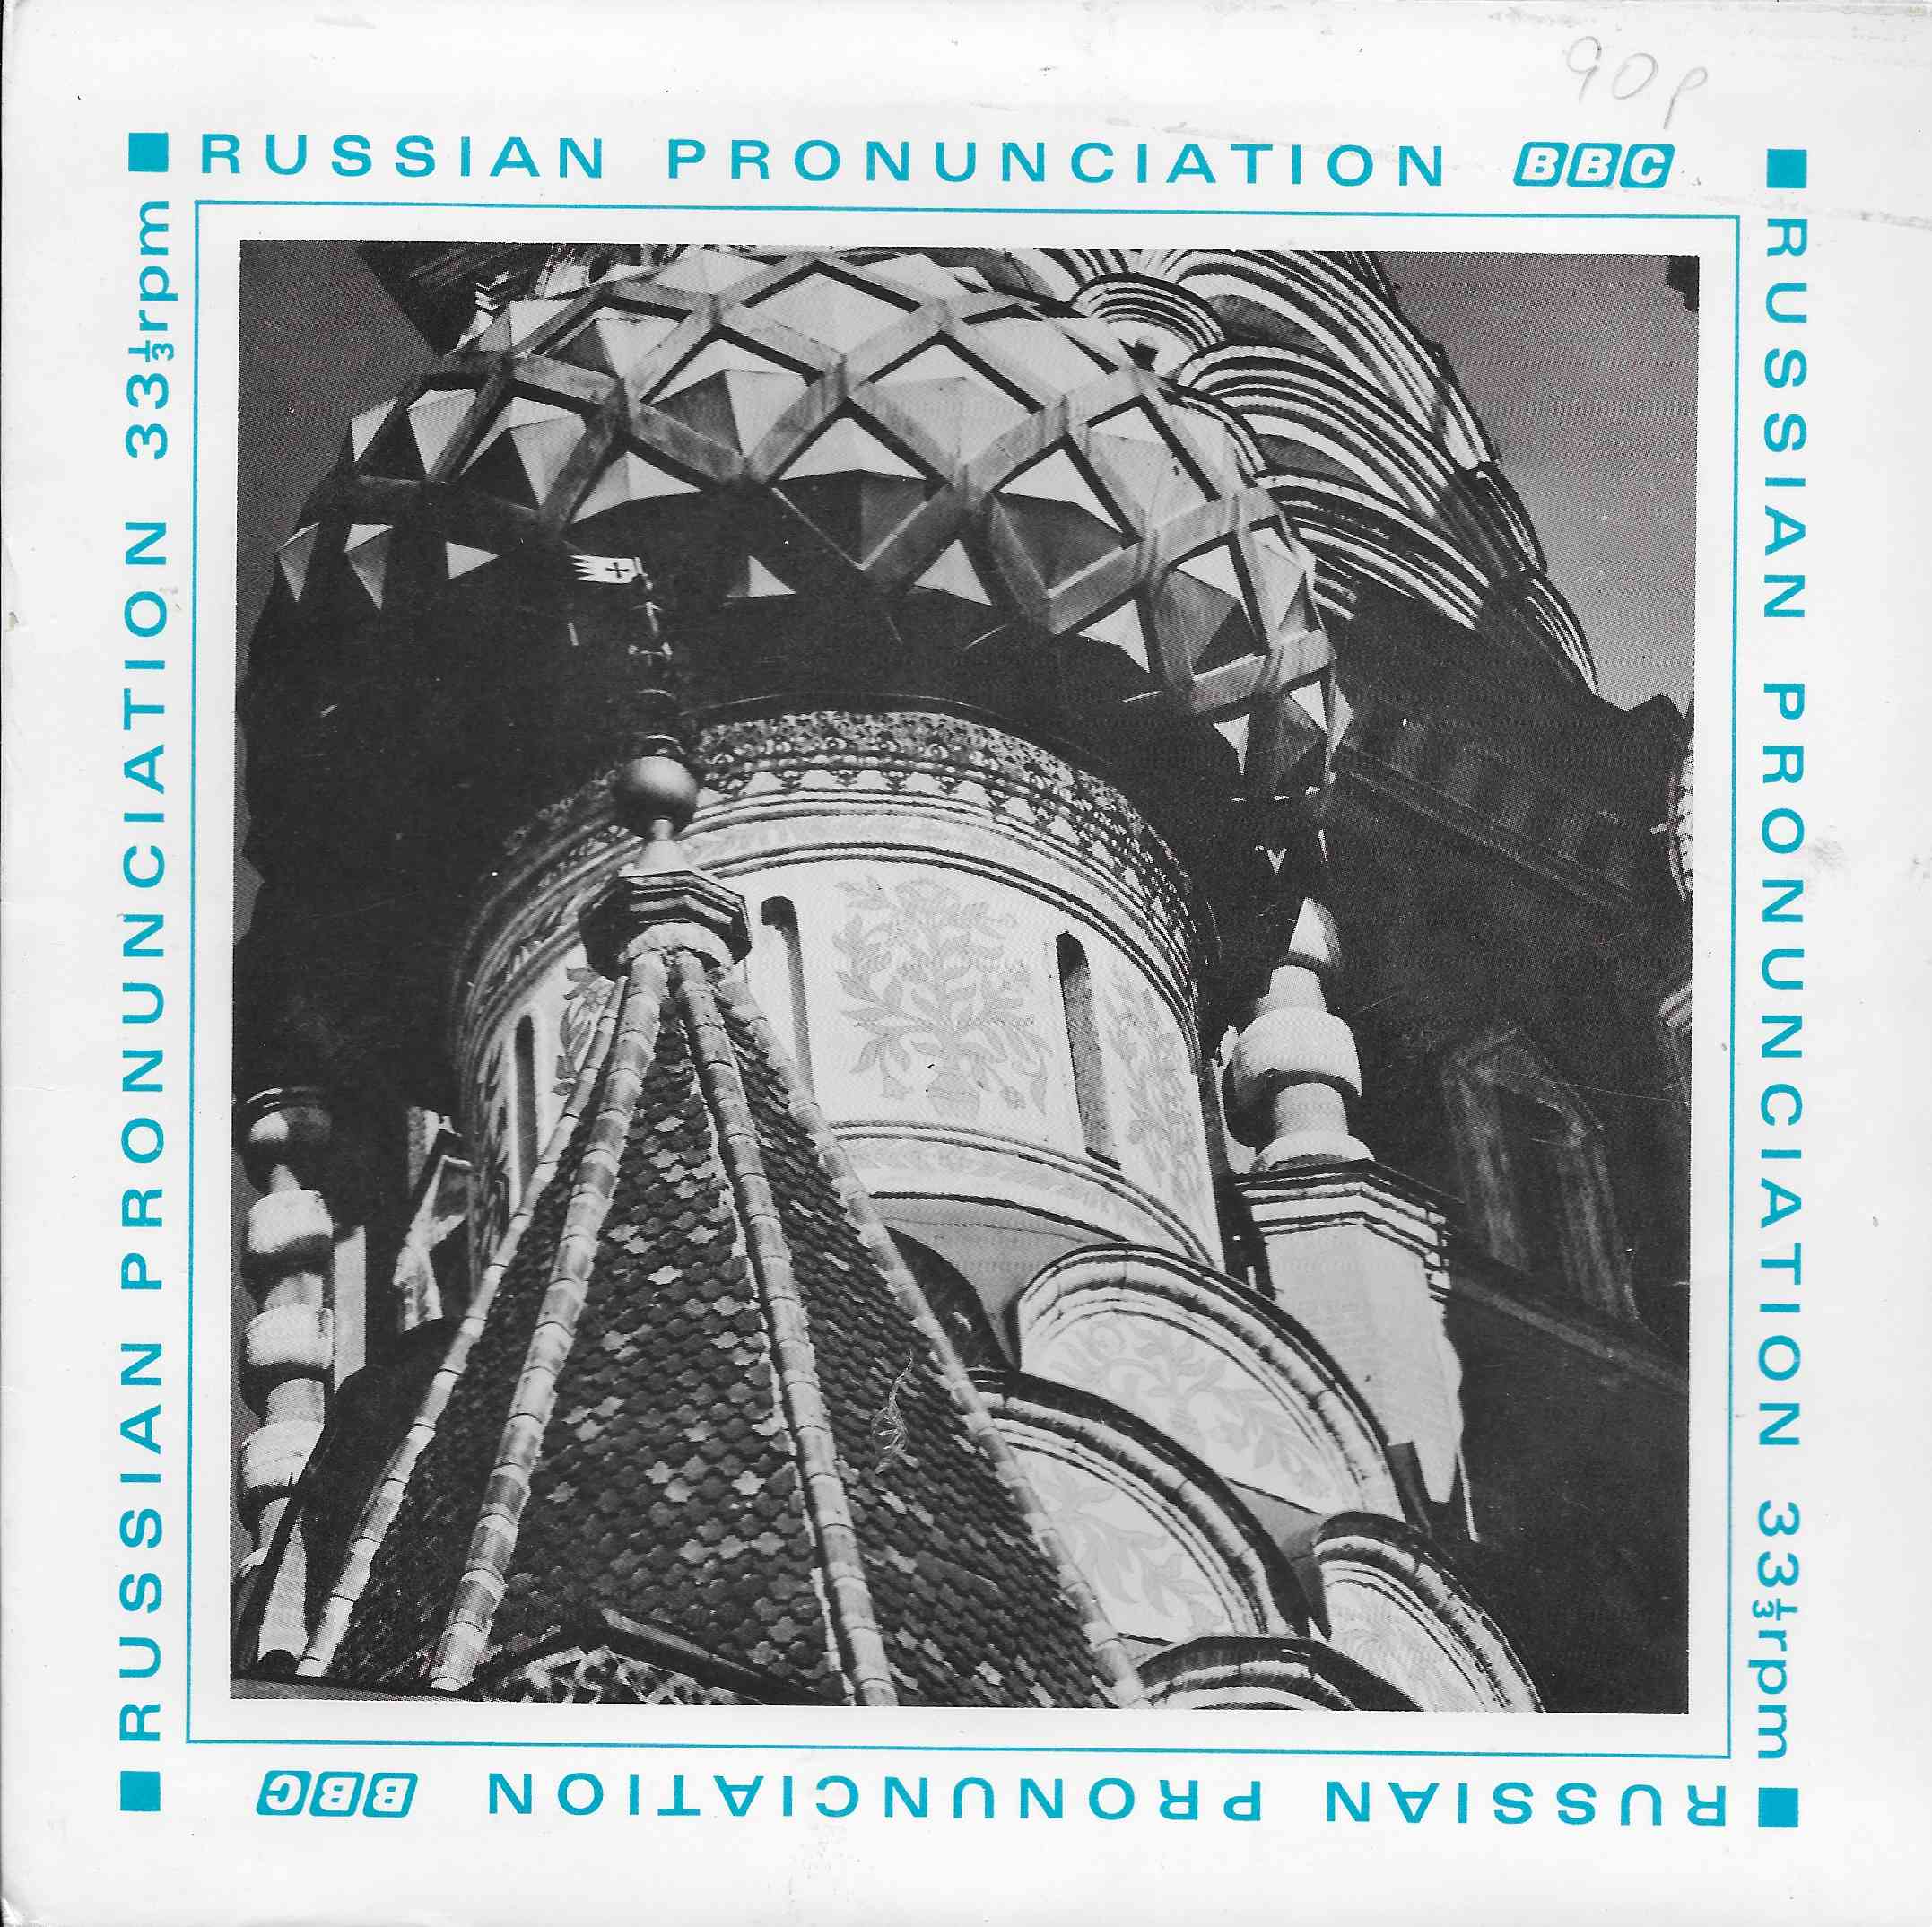 Picture of OP 197/198 Russian pronunciation - Includes booklet by artist Natalie Waterson from the BBC singles - Records and Tapes library